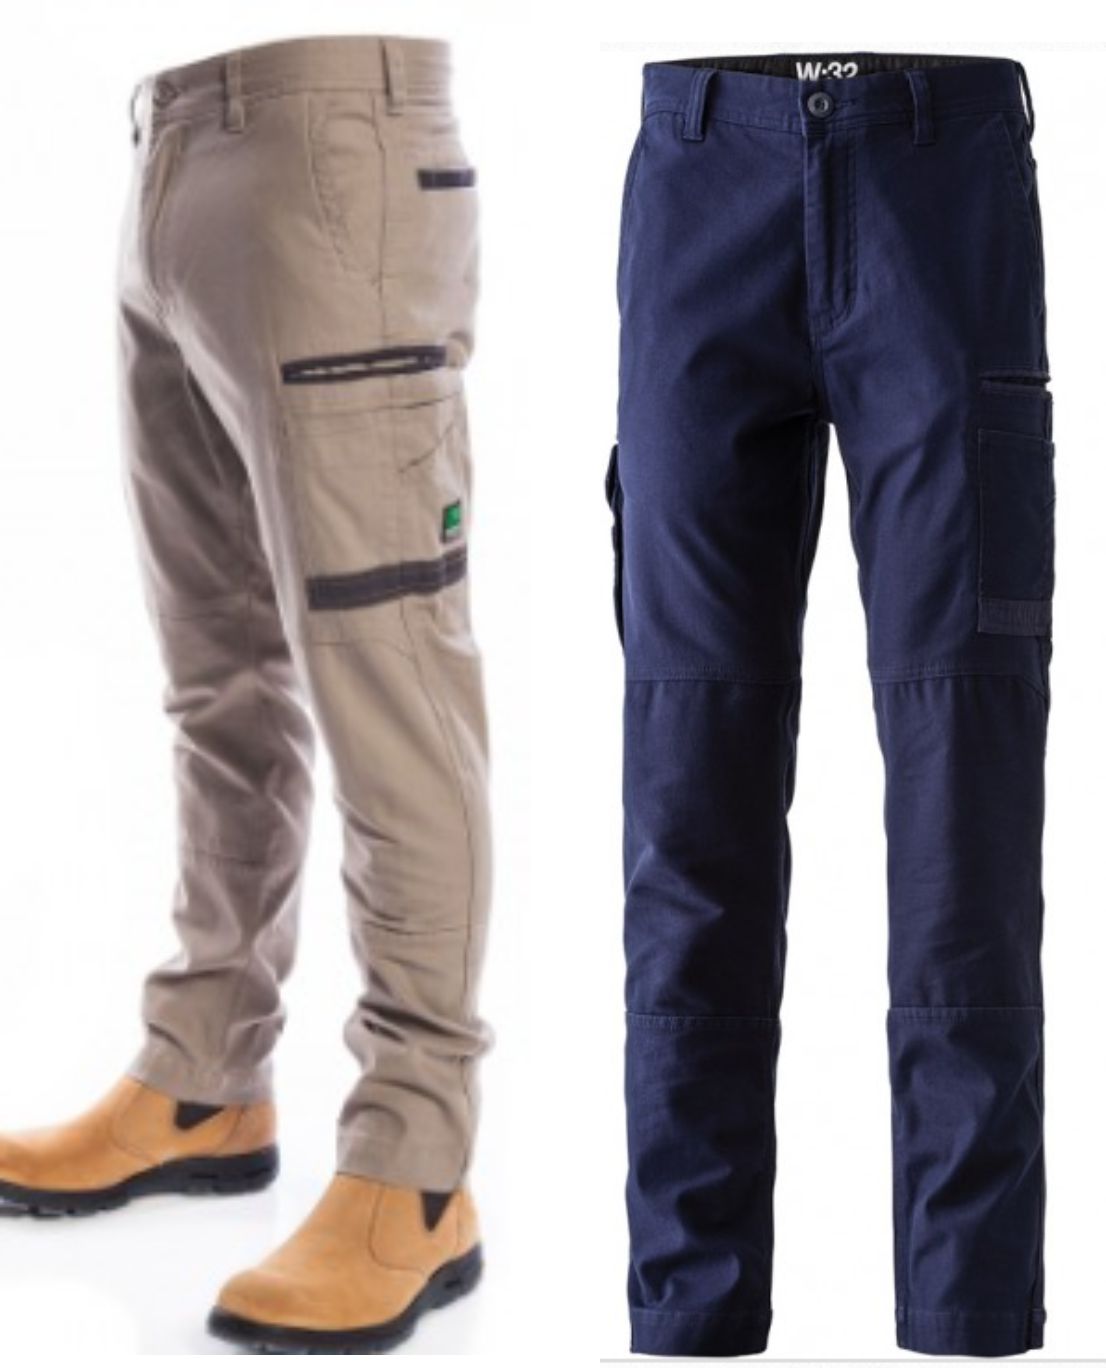 FXD WP-3 Stretched Cargo pants